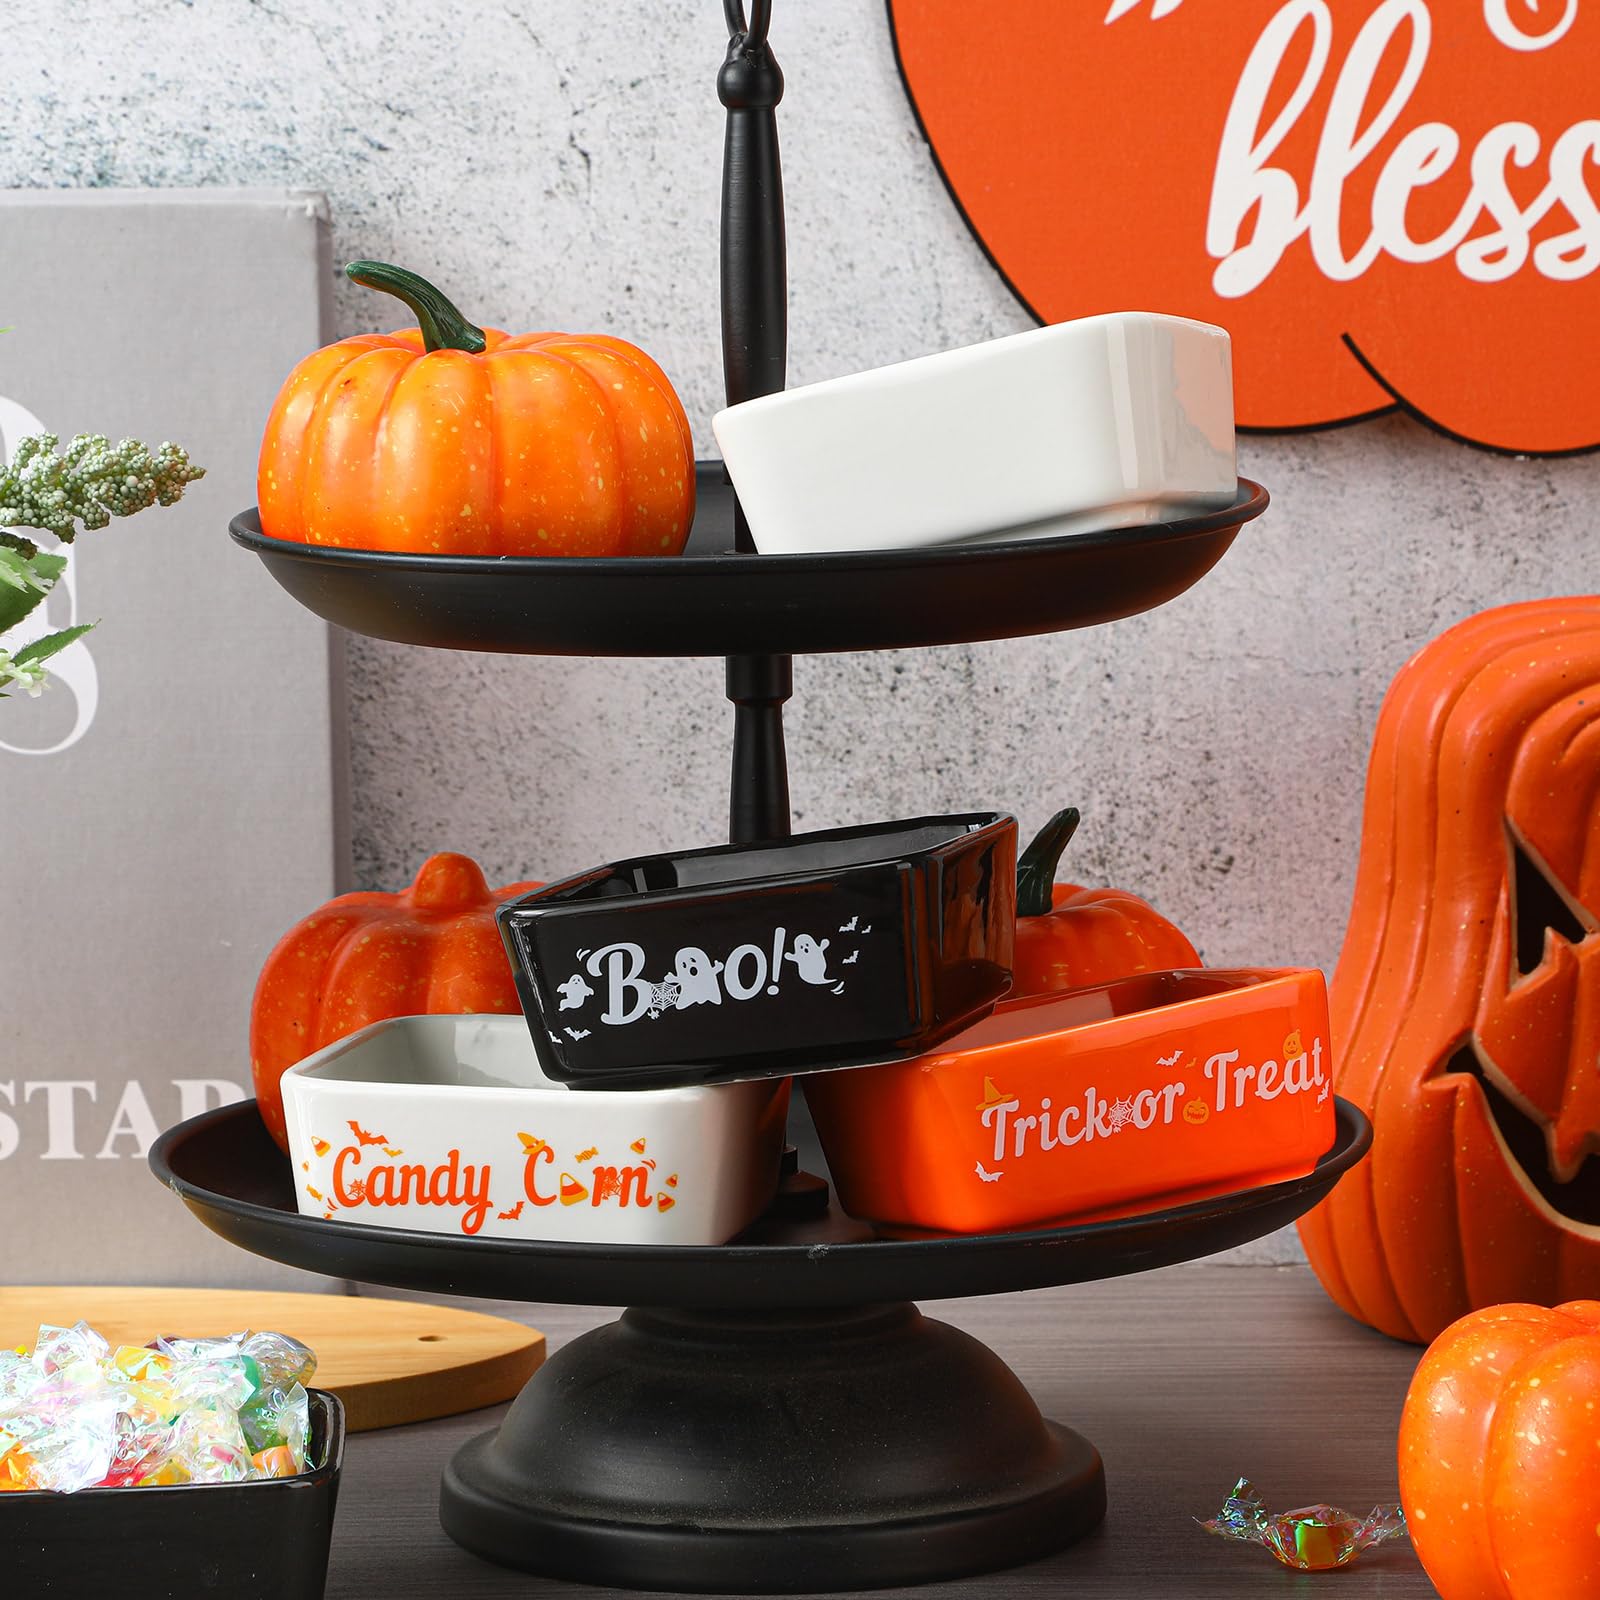 Tanlade 3 Pcs Halloween Candy Bowl Mini Ceramic Bowl for Tiered Tray Halloween Candy Dish Halloween Party Supplies Candy Holder for Farmhouse Home Housewarming Gift (Candy Corns)